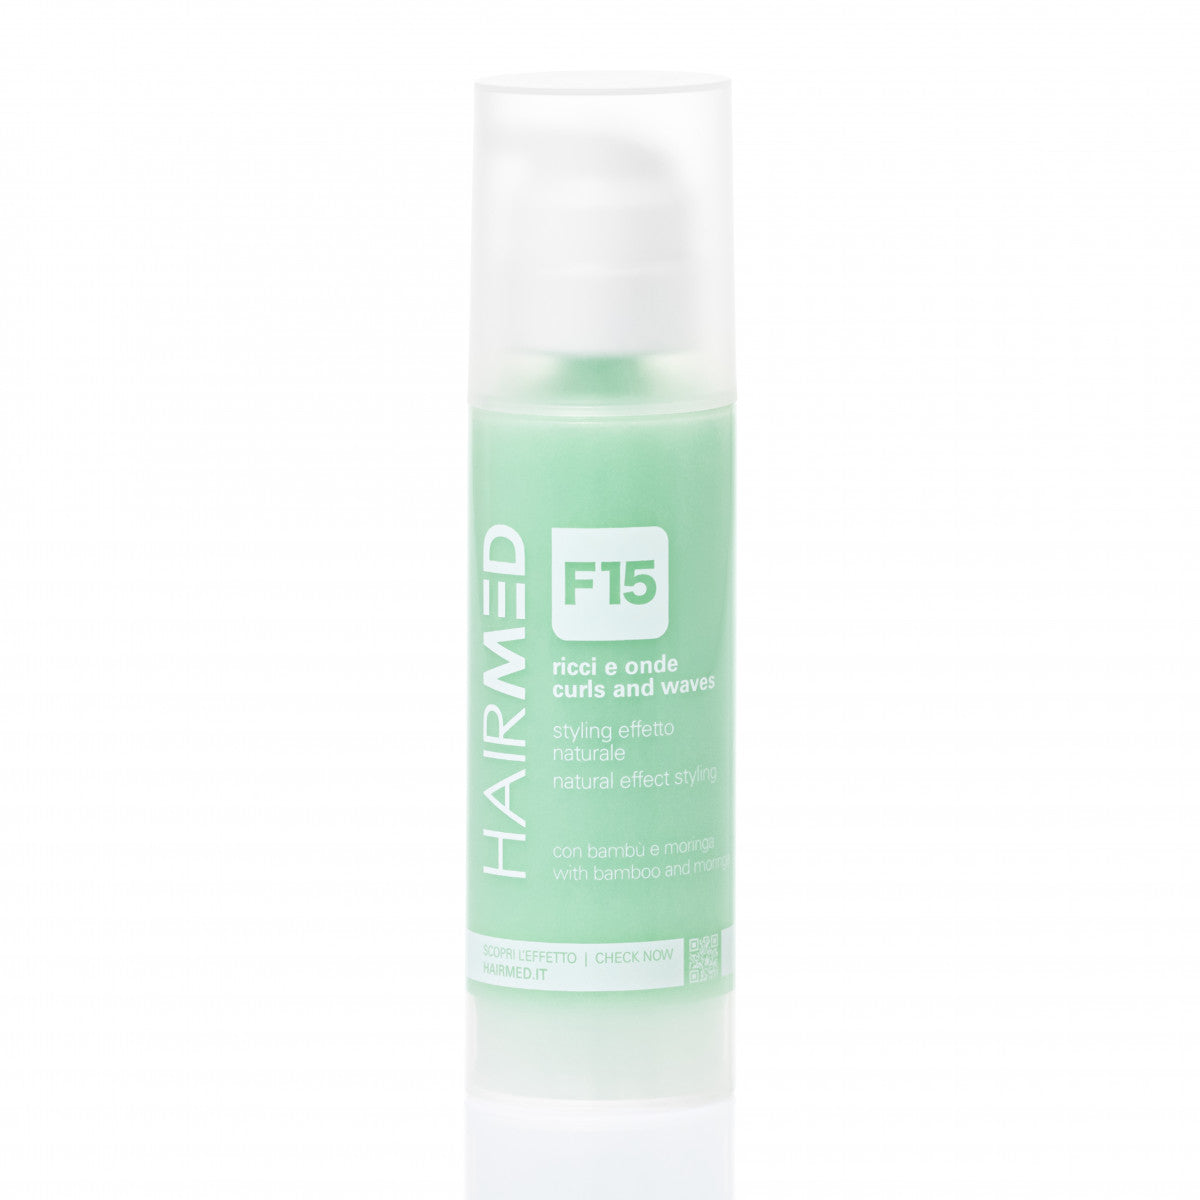 Hairmed F15 Natural curl styling cream 150ml